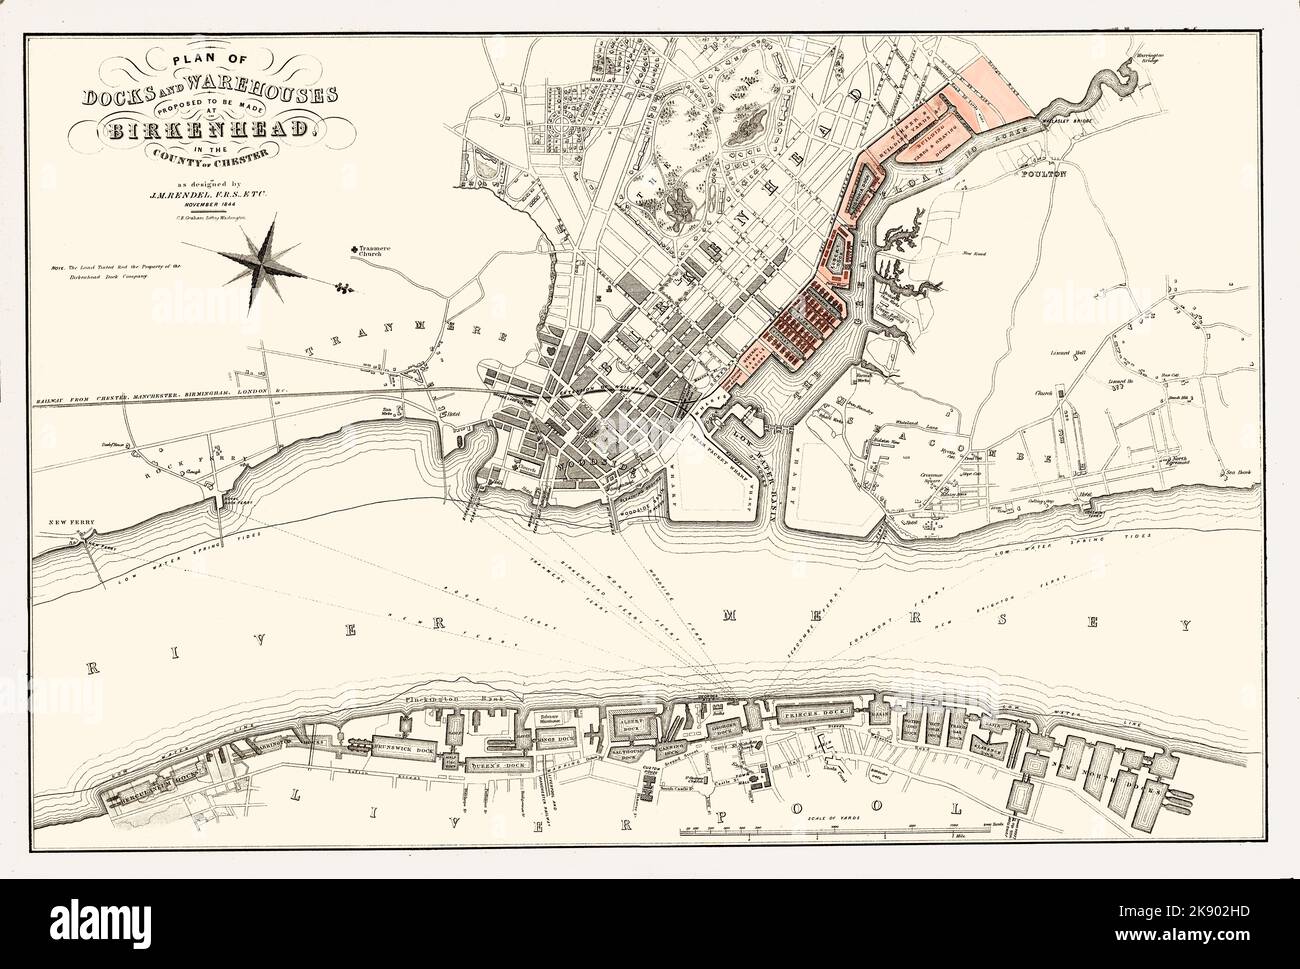 It was in 1824 that William Laird created a new town at Birkenhead, built a shipyard and the new town grew rapidly. In 1843 James Meadows Rendel made plans (marked in red)  for the docks and warehouses at Birkenhead, on the Wirral, on the opposite side of the River Mersey from Liverpool. The scheme was managed by the Birkenhead Dock Co until the financial crisis of 1847. In 1858 the Birkenhead Dock Estate was transferred to the Liverpool Dock Trustees, since recognised under the title of The Mersey Docks and Harbour Board who gained the rights to dock ownership and revenues. Stock Photo